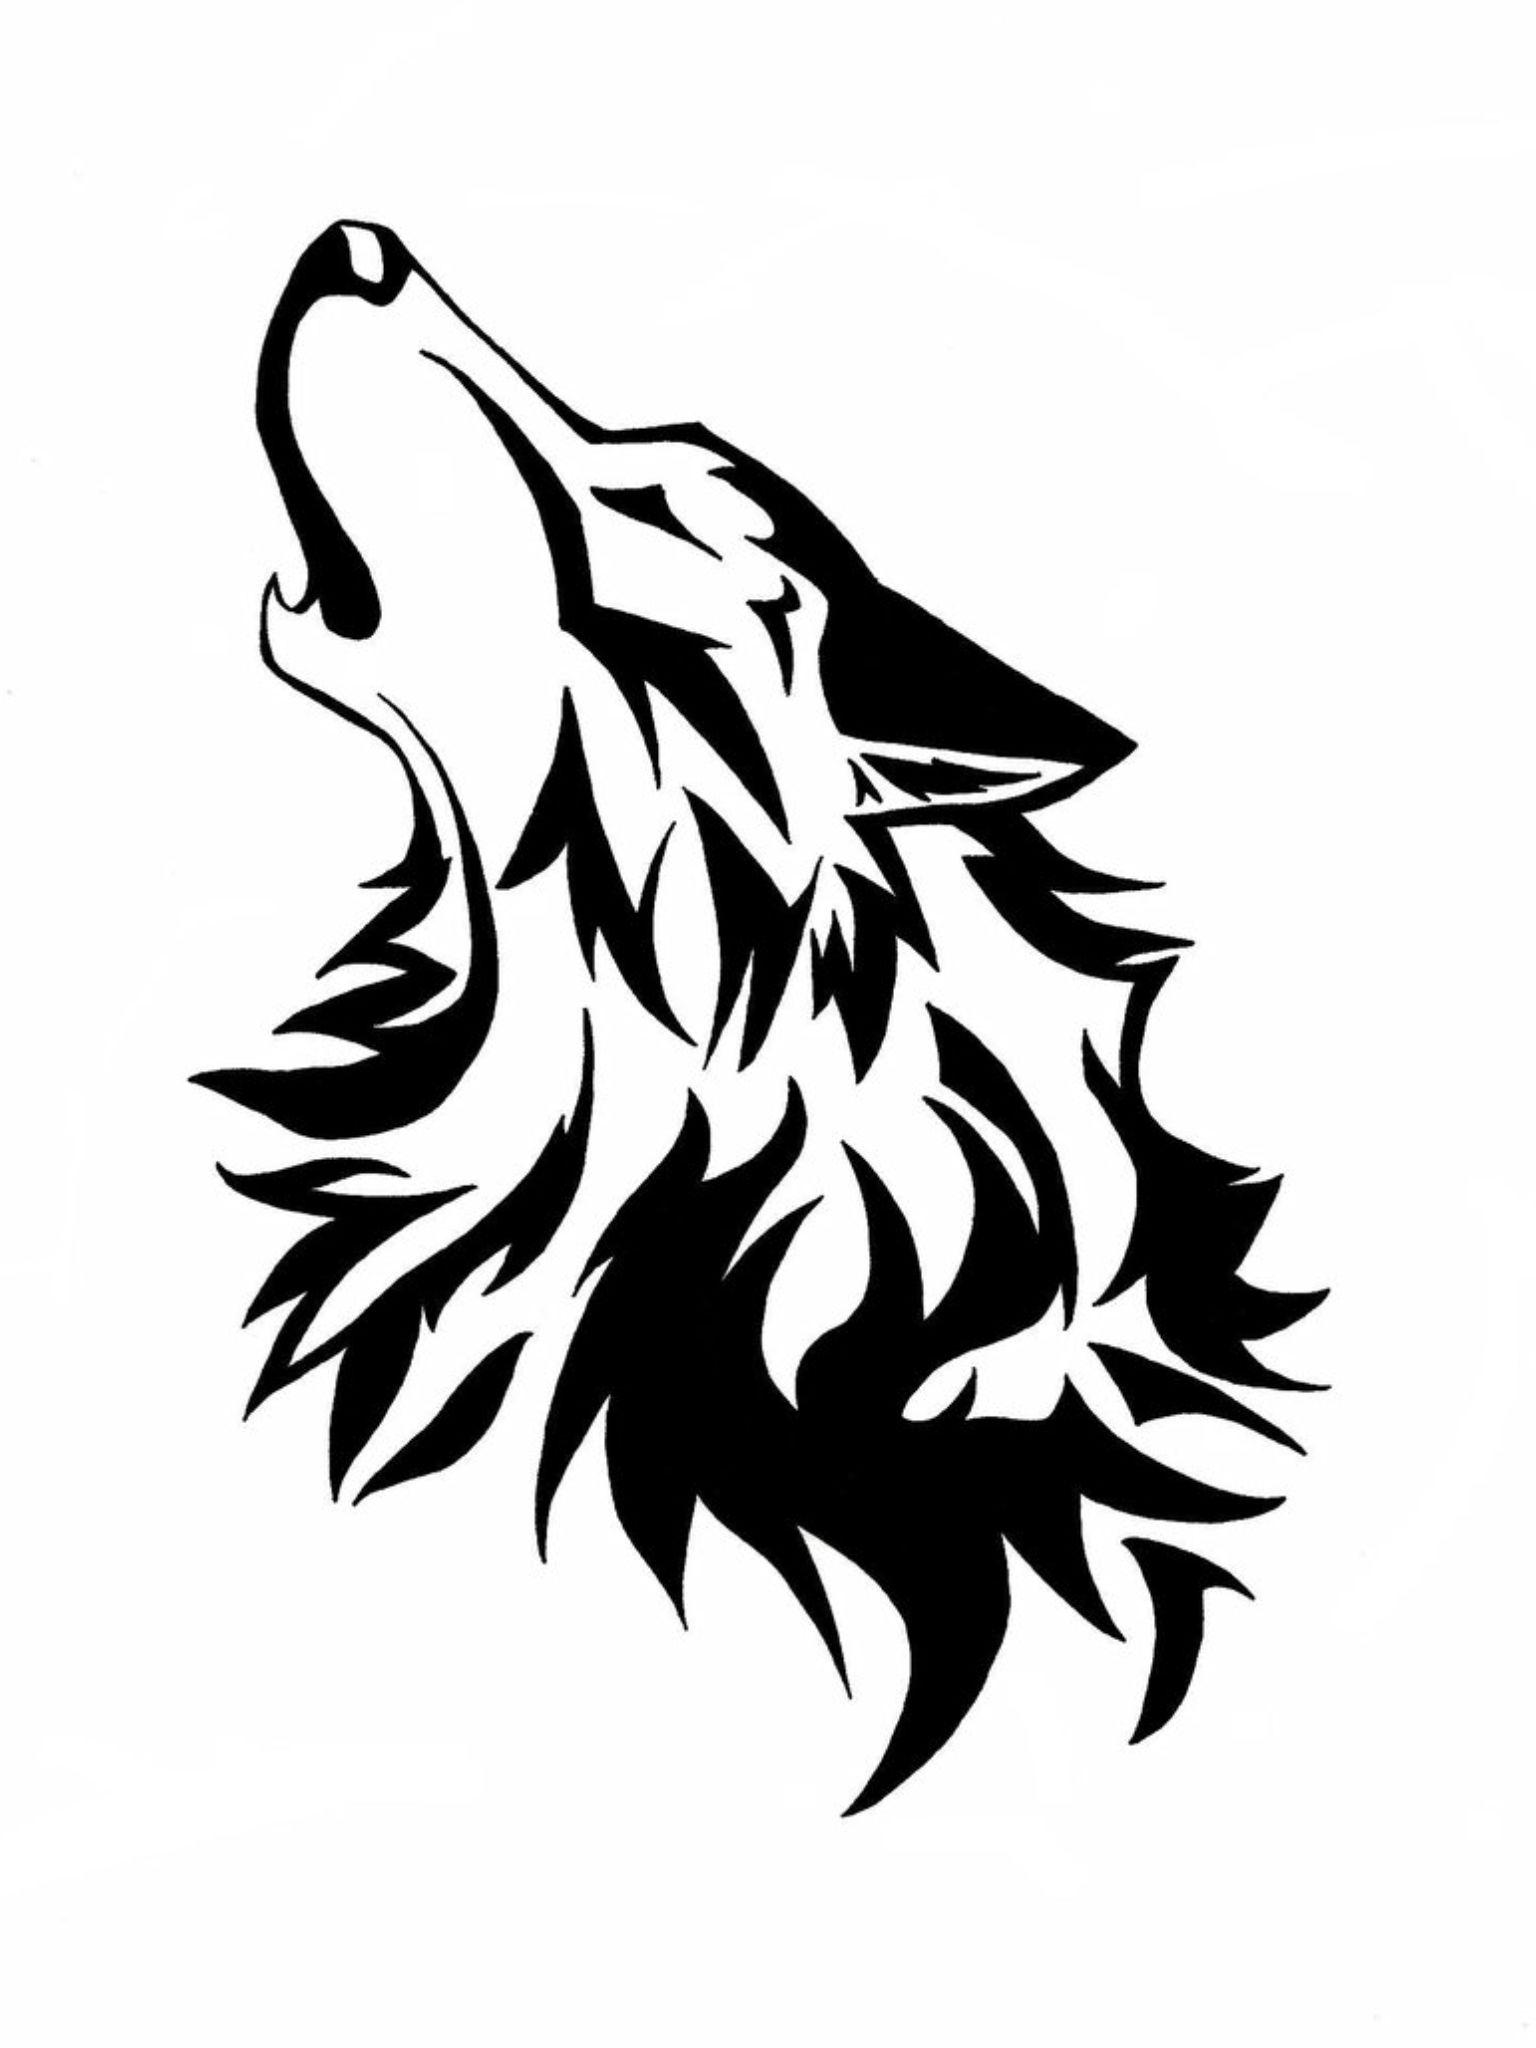 Howling Wolf Logo - Free Howling Wolf Icon 237906 | Download Howling Wolf Icon - 237906